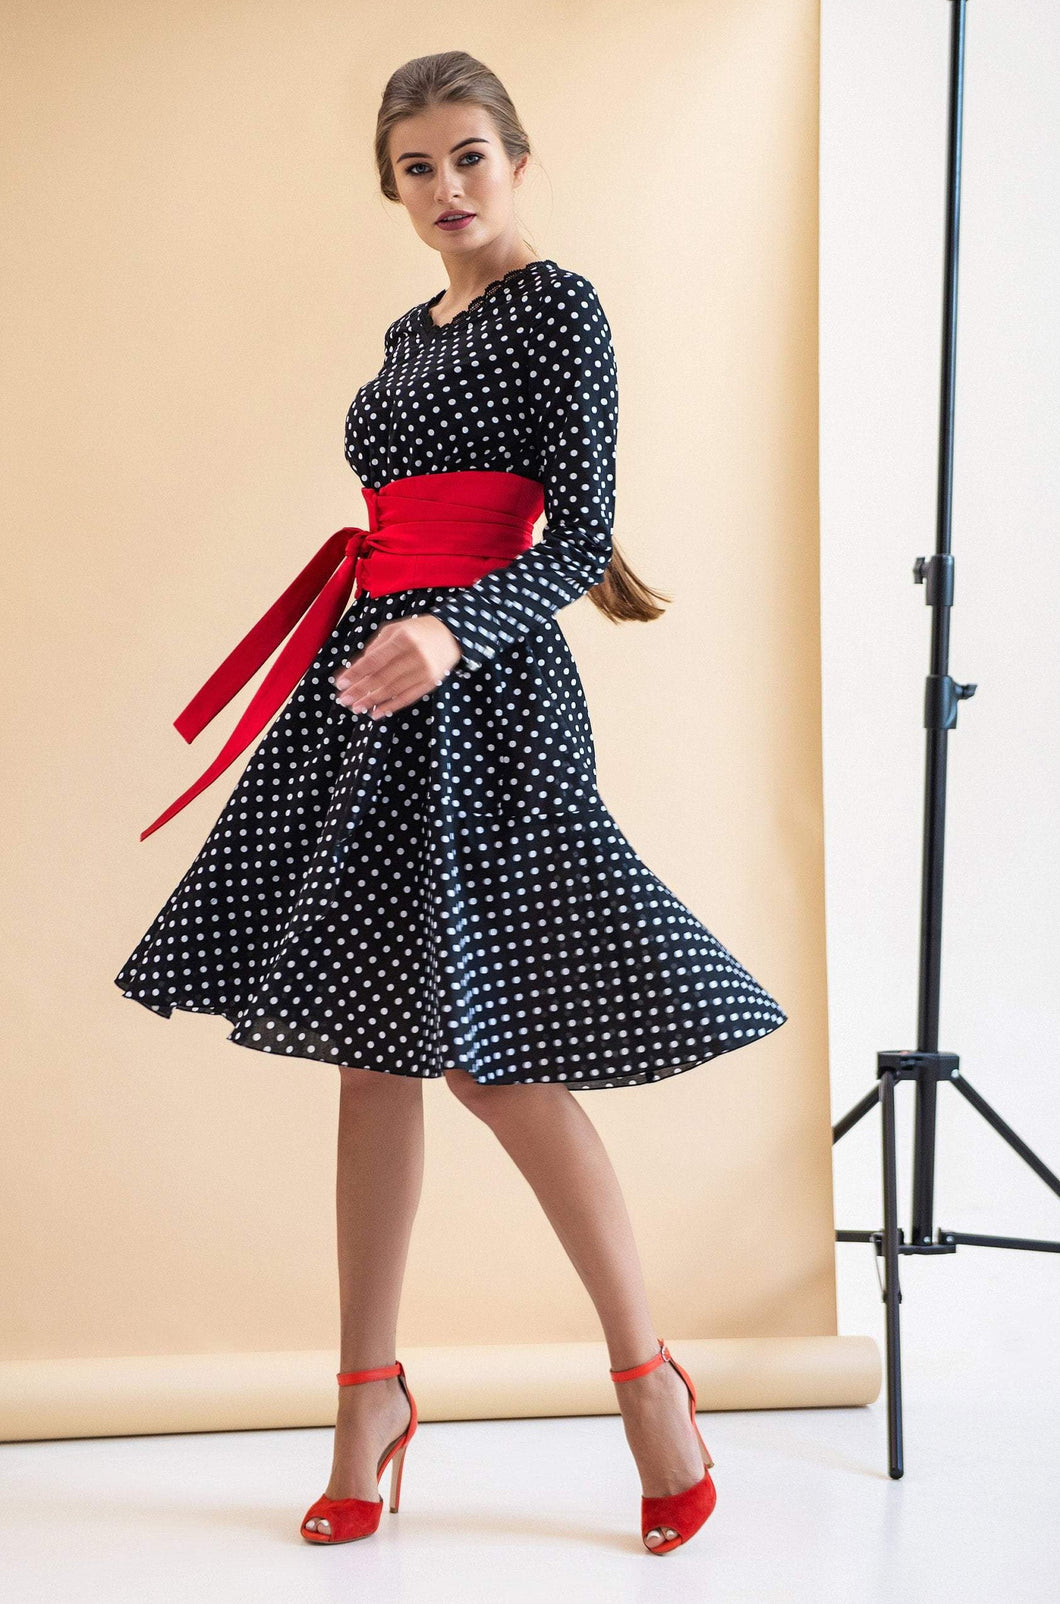 Polka dot long sleeve cotton dress with wide red satin belt